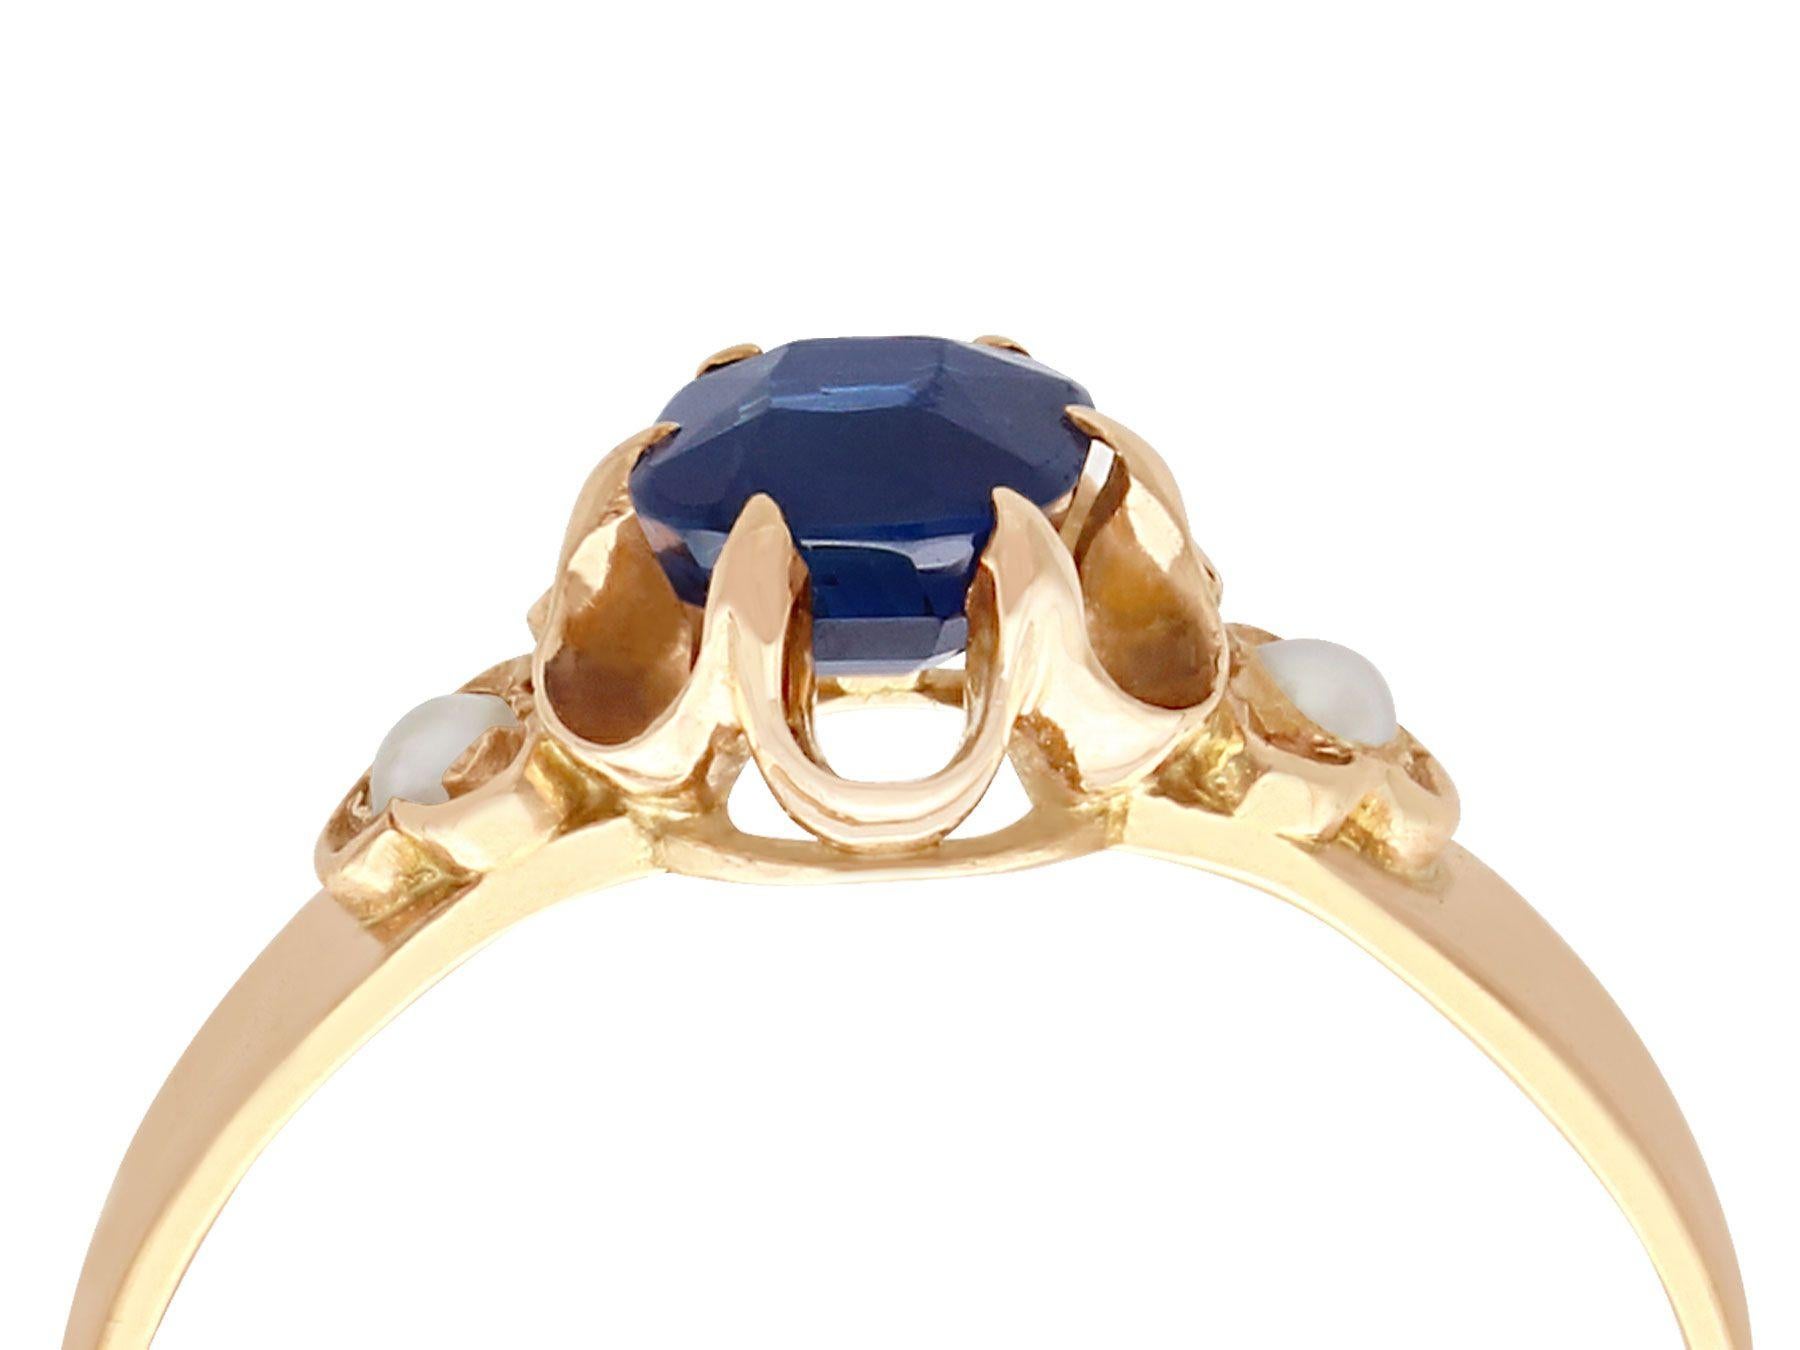 A fine and impressive 1.09 carat blue sapphire and seed pearl, 18 karat yellow gold dress ring; part of our diverse antique jewelry and estate jewelry collections.

This fine and impressive blue sapphire and pearl ring has been crafted in 18k yellow